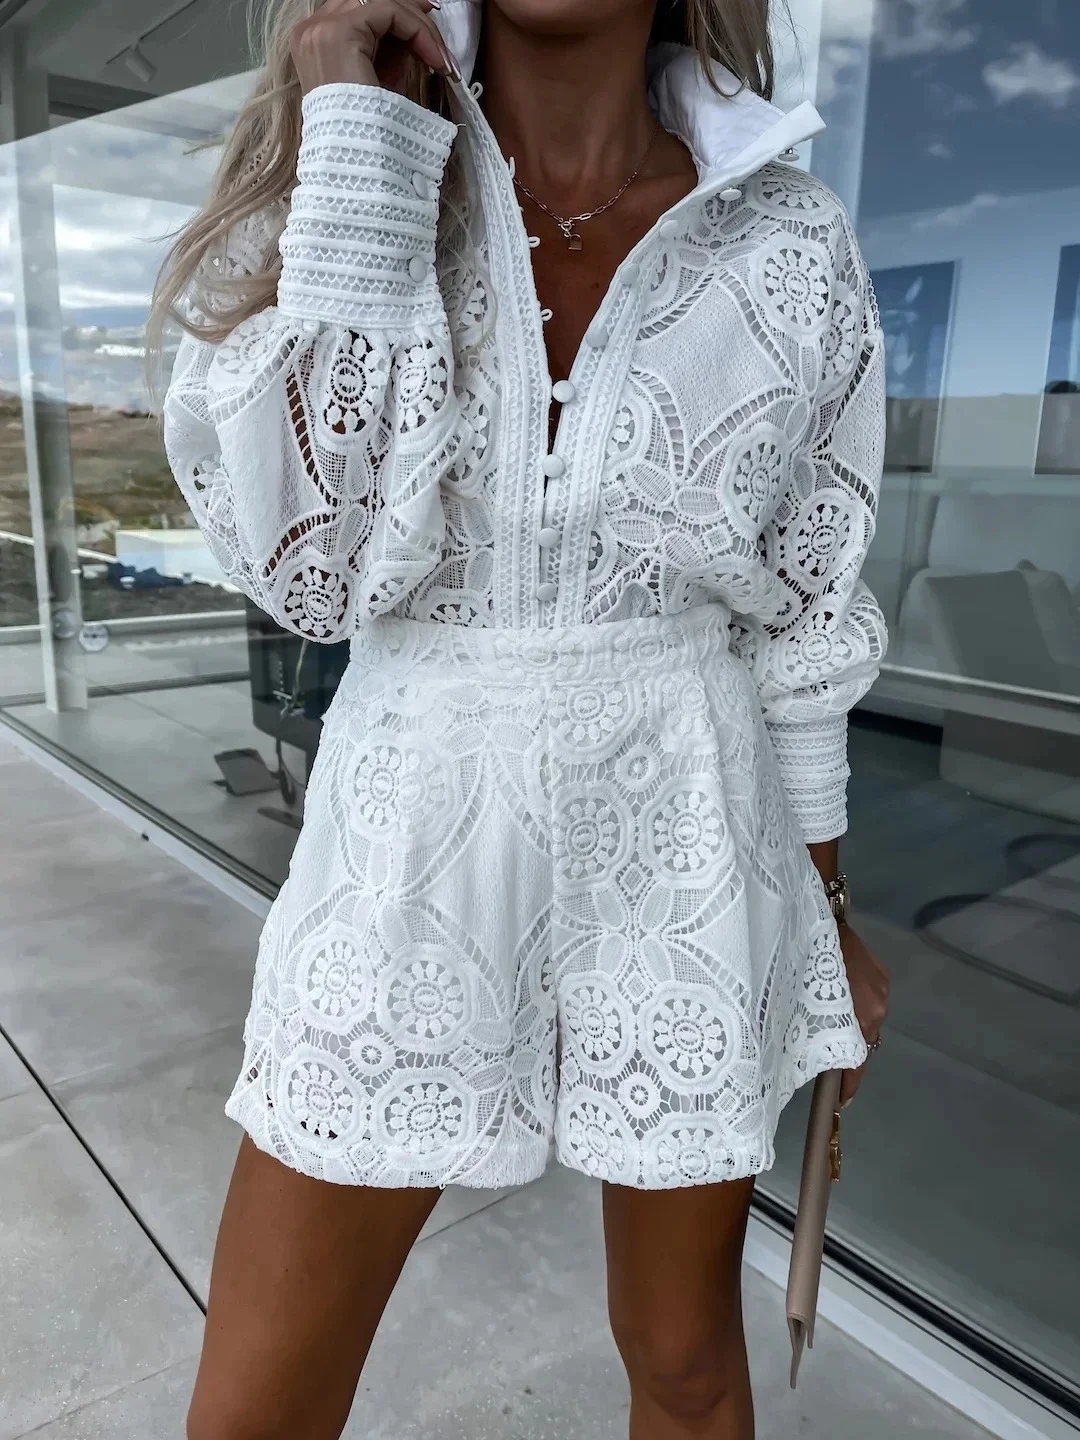 Embroidery Short Sets Loungewear Women Lace Pajamas Sets Spring Summer Long Sleeve Short Suits Elegant Casual 2 Pcs Outfits